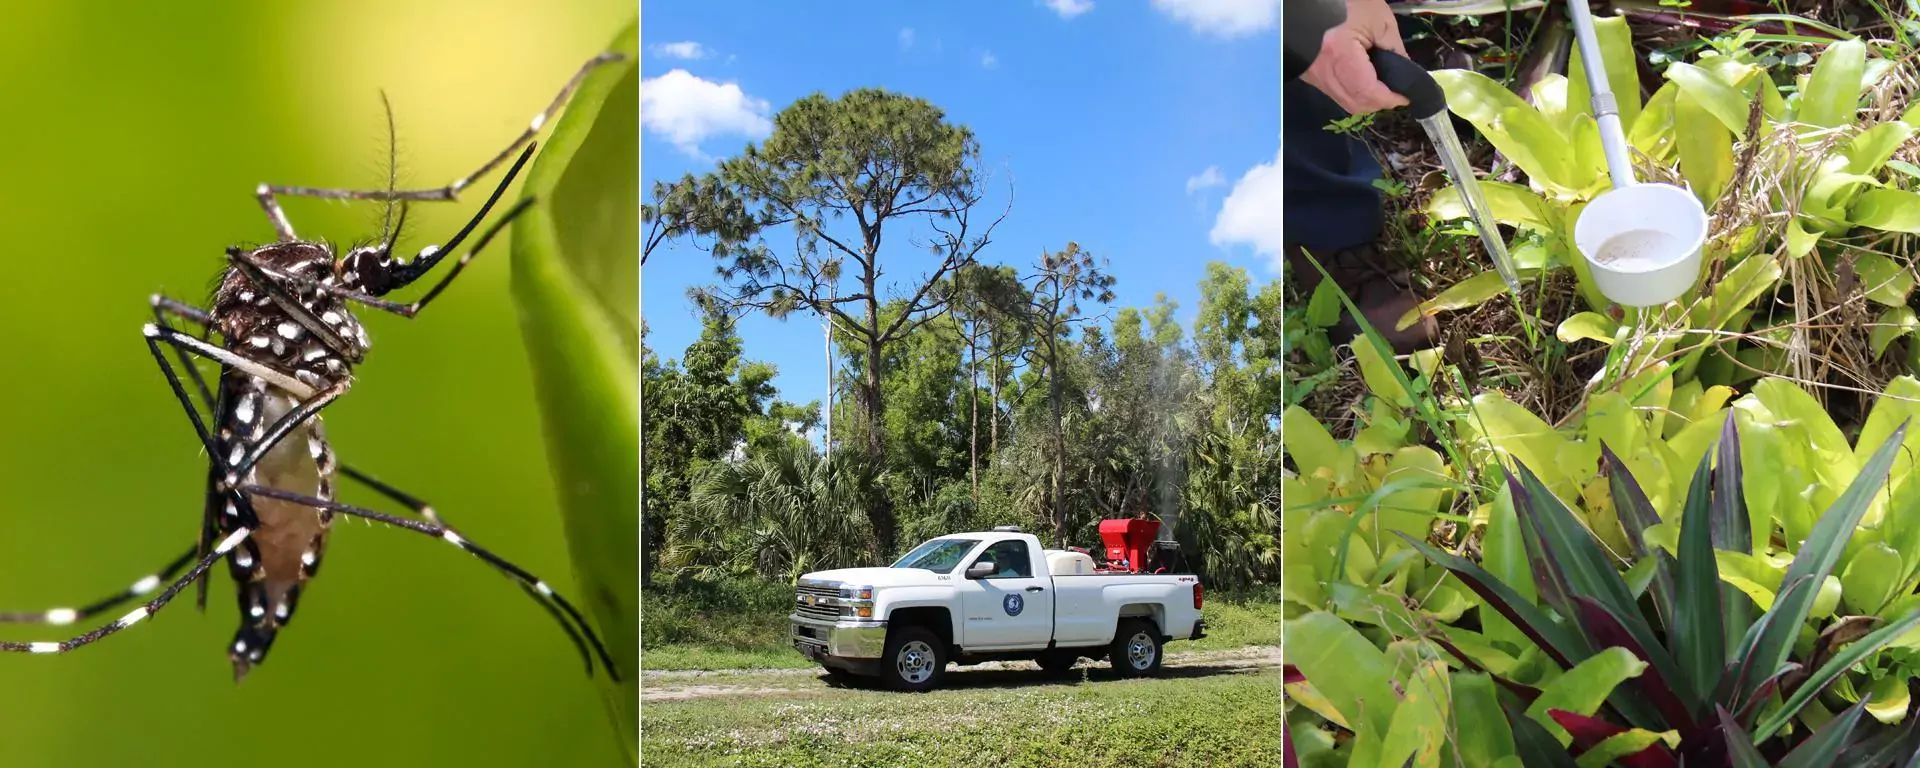 Aedes Aegypti and a Martin County Mosquito Control truck